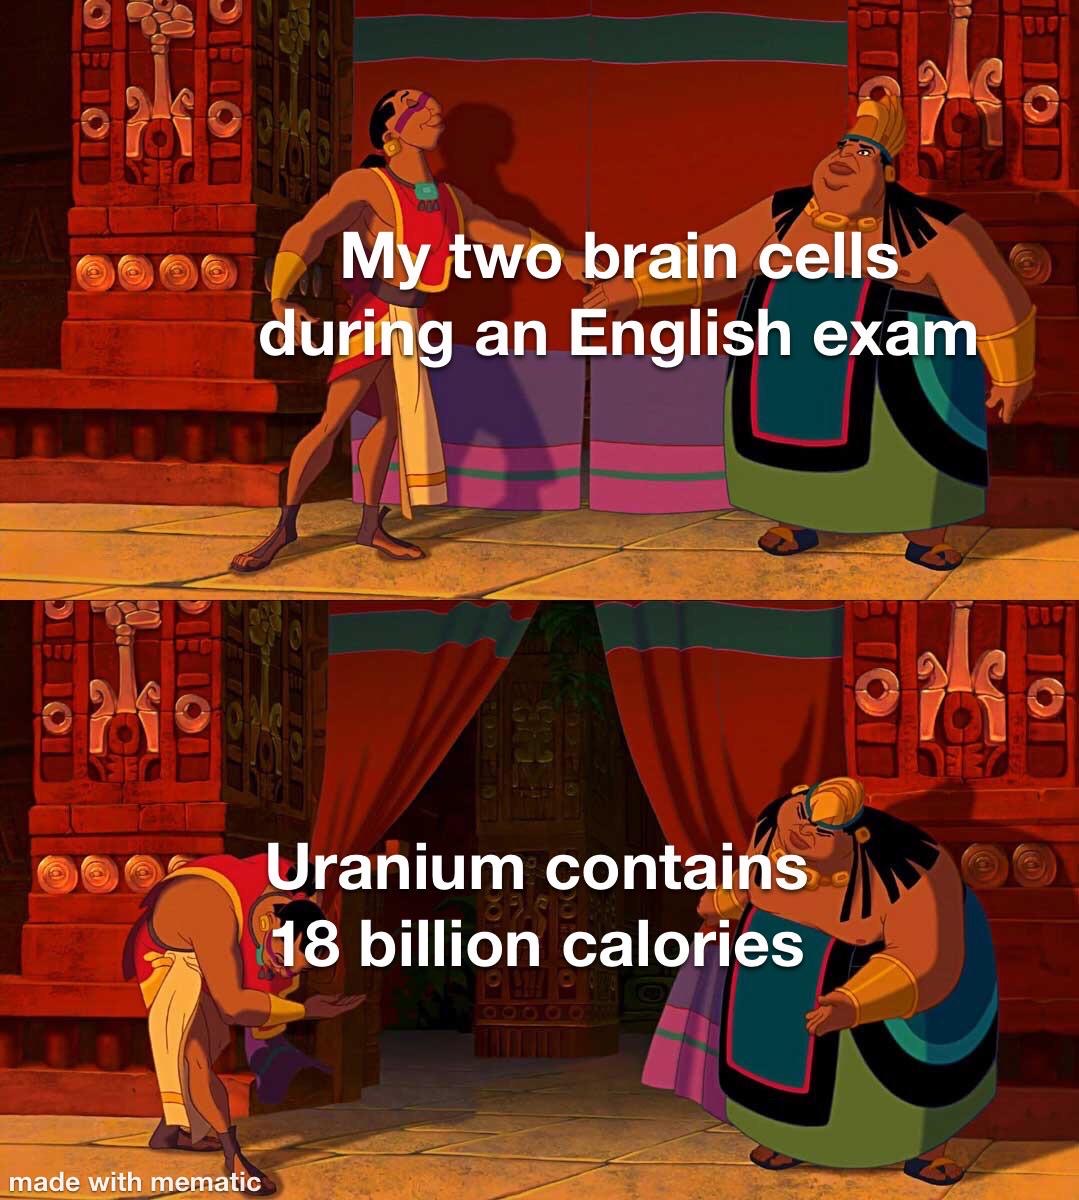 games - 180 fo My two brain cells during an English exam Uranium contains 18 billion calories made with mematic